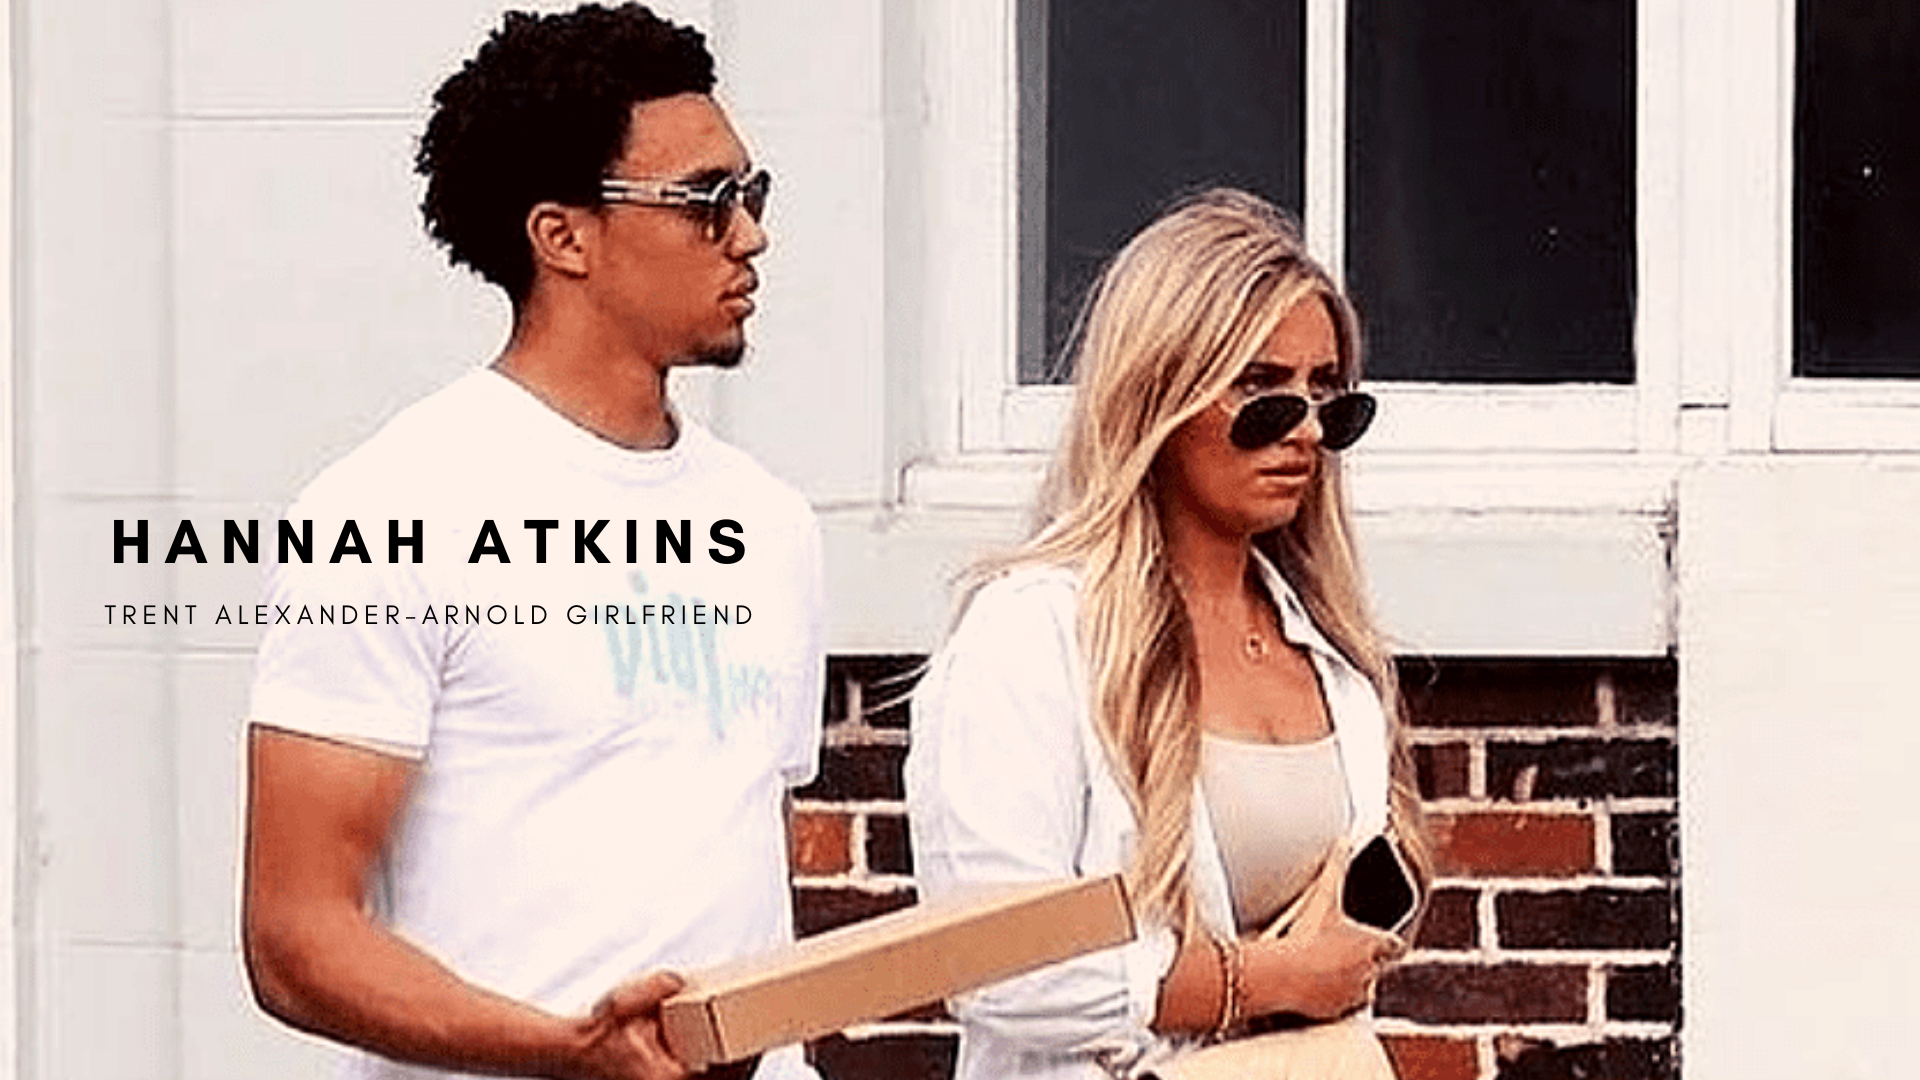 Trent Alexander-Arnold with girlfriend Hannah Atkins. (Credit: Eamonn and Clarke)